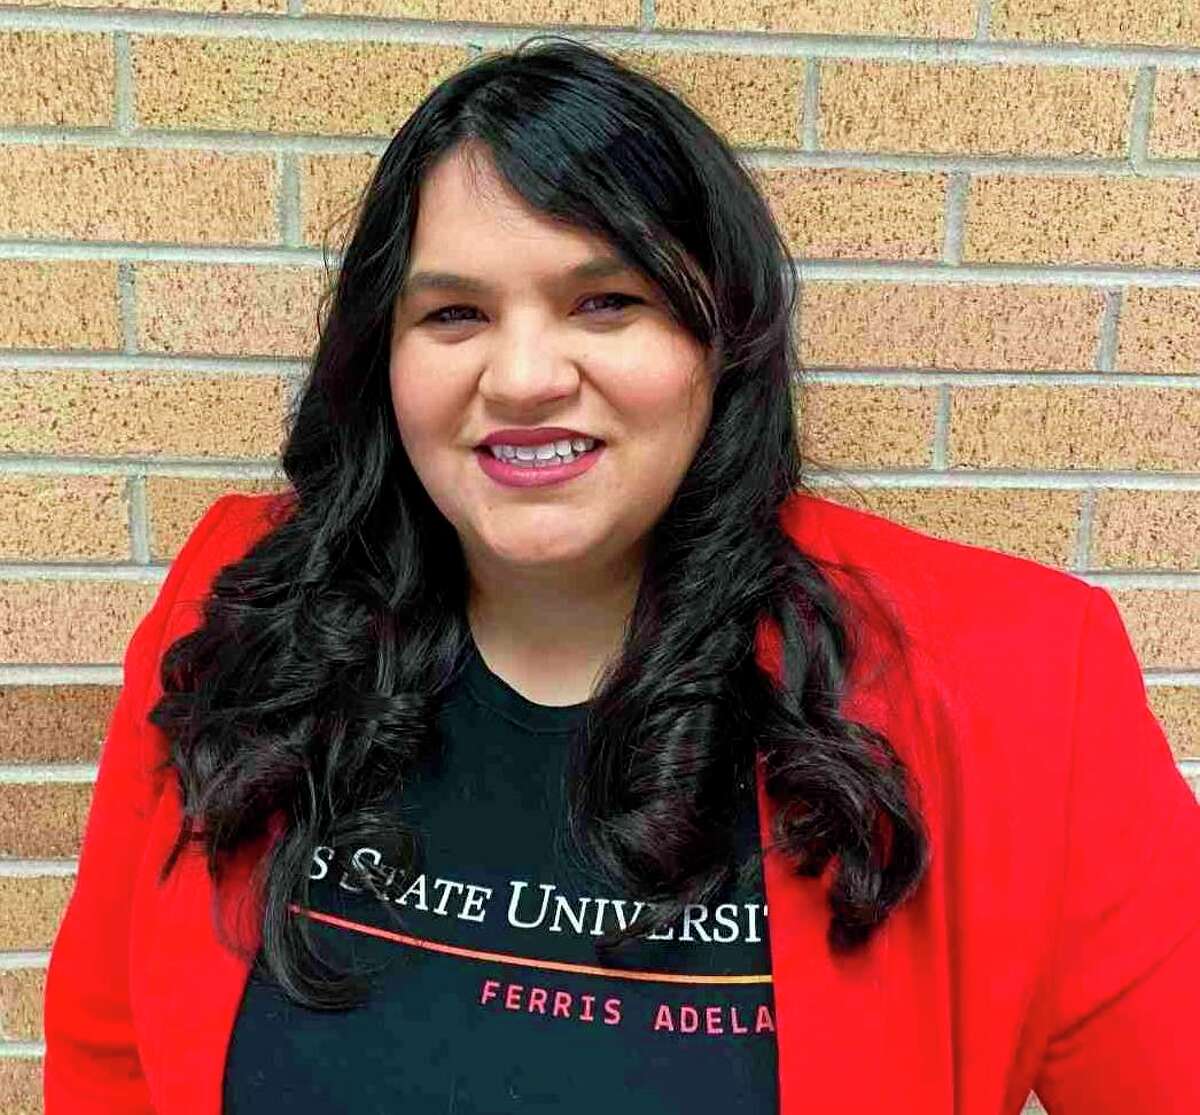 Center for Latin@ Studies Executive Director Kaylee Moreno Burke was the choice of the Ferris Women's Network to receive the 2021 Helen Gillespie Ferris Distinguished Women Leader Award. (Courtesy photo)